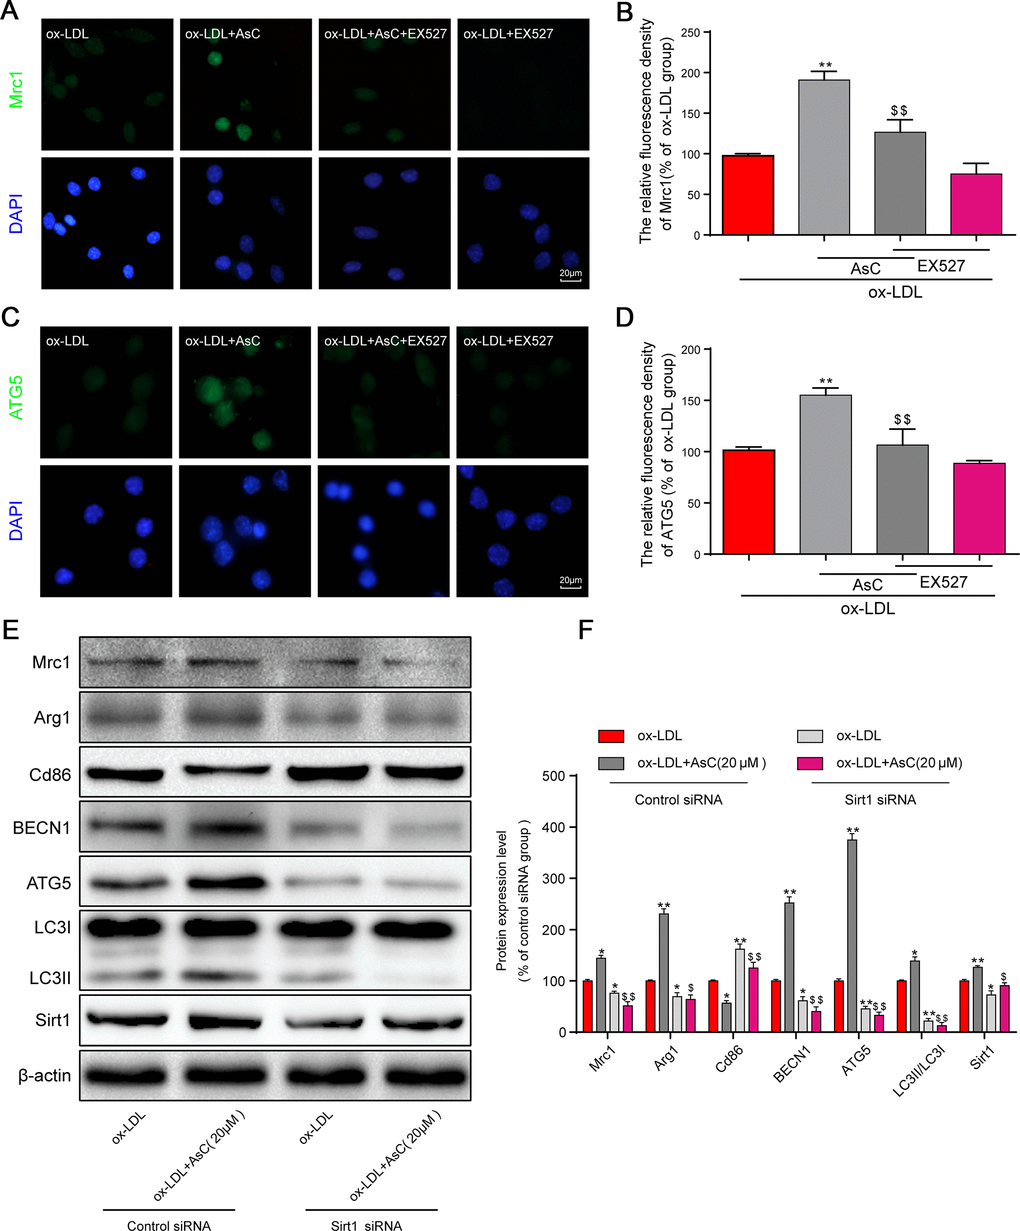 AsC-induced autophagy and M2 phenotype polarization were Sirt1-dependent in ox-LDL-treated macrophages. Sirt1 was inhibited by 10 μM EX527 for 6 h or knocked down by siRNA, as described in the Materials and Methods section. Twenty-four hours posttransfection, cells were treated with AsC (20 μM) for 12 h and then incubated with ox-LDL (80 μg/mL) for an additional 24 h. (A, C) Representative immunofluorescence images showing Mrc1 and ATG5 expression in RAW264.7 cells. (B, D) The relative quantitative analysis of Mrc1 and ATG5 fluorescence in RAW264.7 cells. (E) Representative western blot analysis of Mrc1, Arg1, Cd86, BECN1, ATG5, LC3, Sirt1 and β-actin in macrophages. (F) Quantification of the expression of Mrc1, Arg1, Cd86, BECN1, ATG5, LC3, and Sirt1. The data are presented as the means ± SDs (n = 5). *P **P vs. the ox-LDL group; $P $$P vs. the ox-LDL and AsC group.